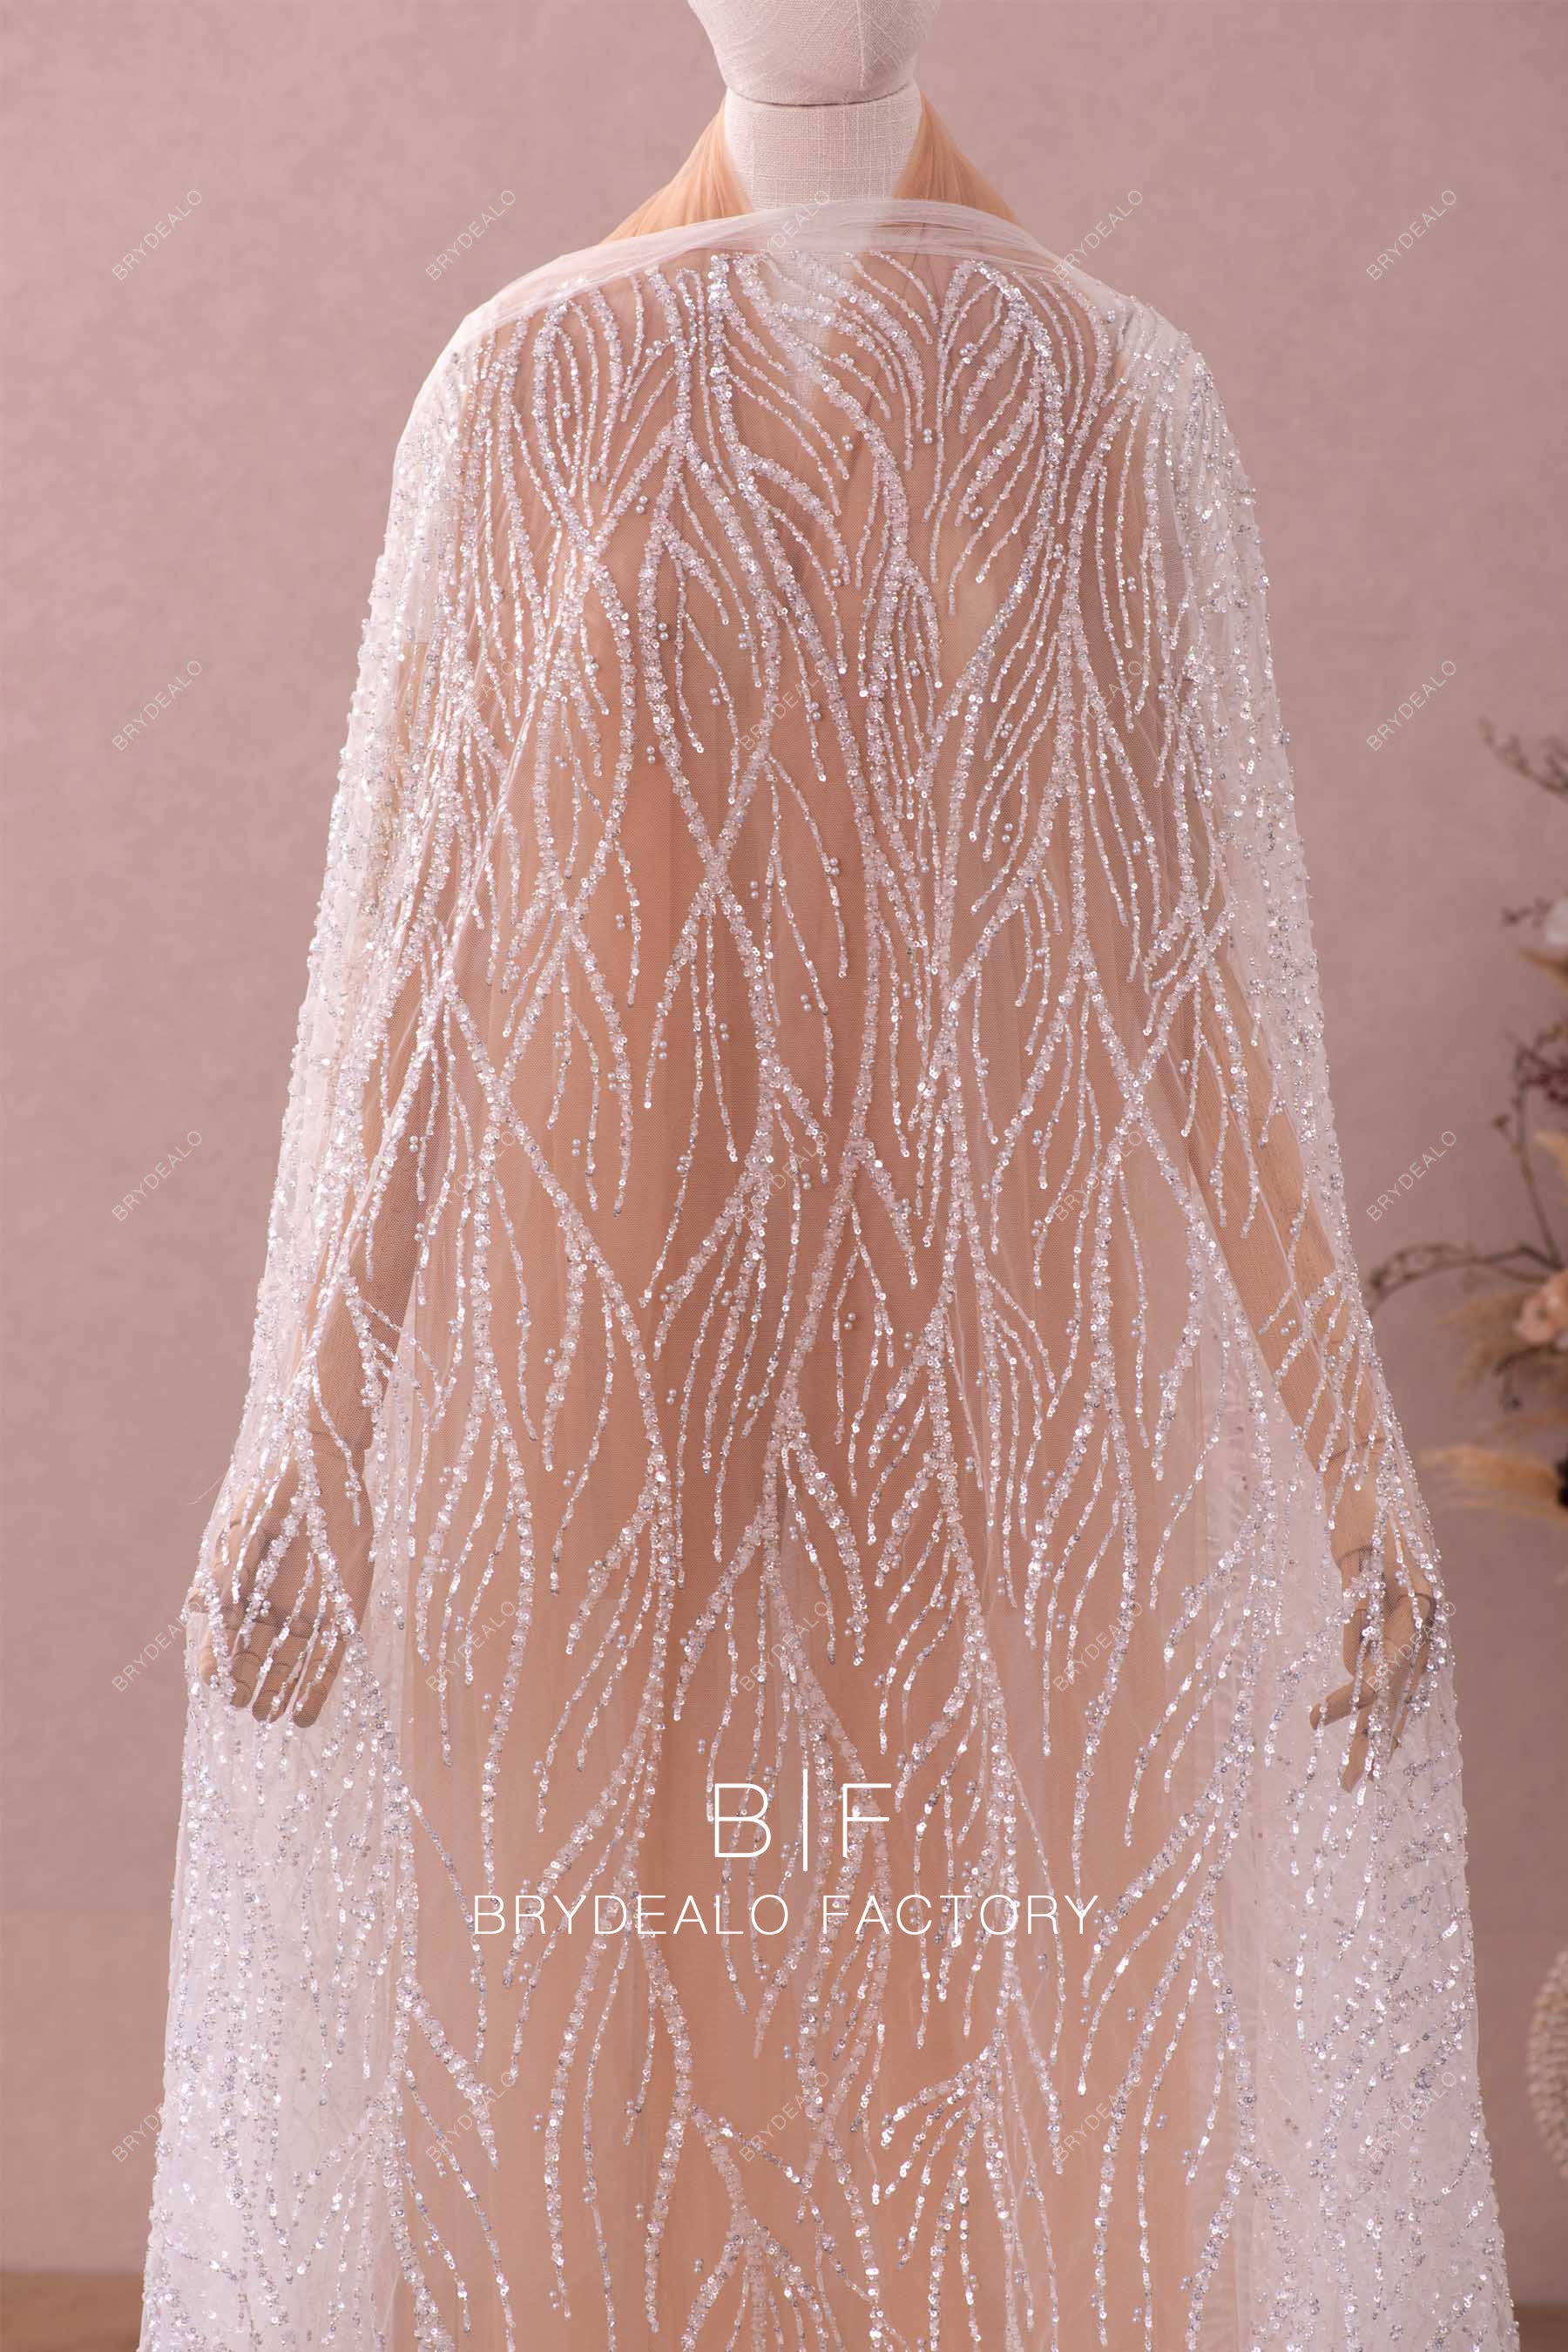 Sparkly High Quality Beaded Twig Pattern Lace Fabric